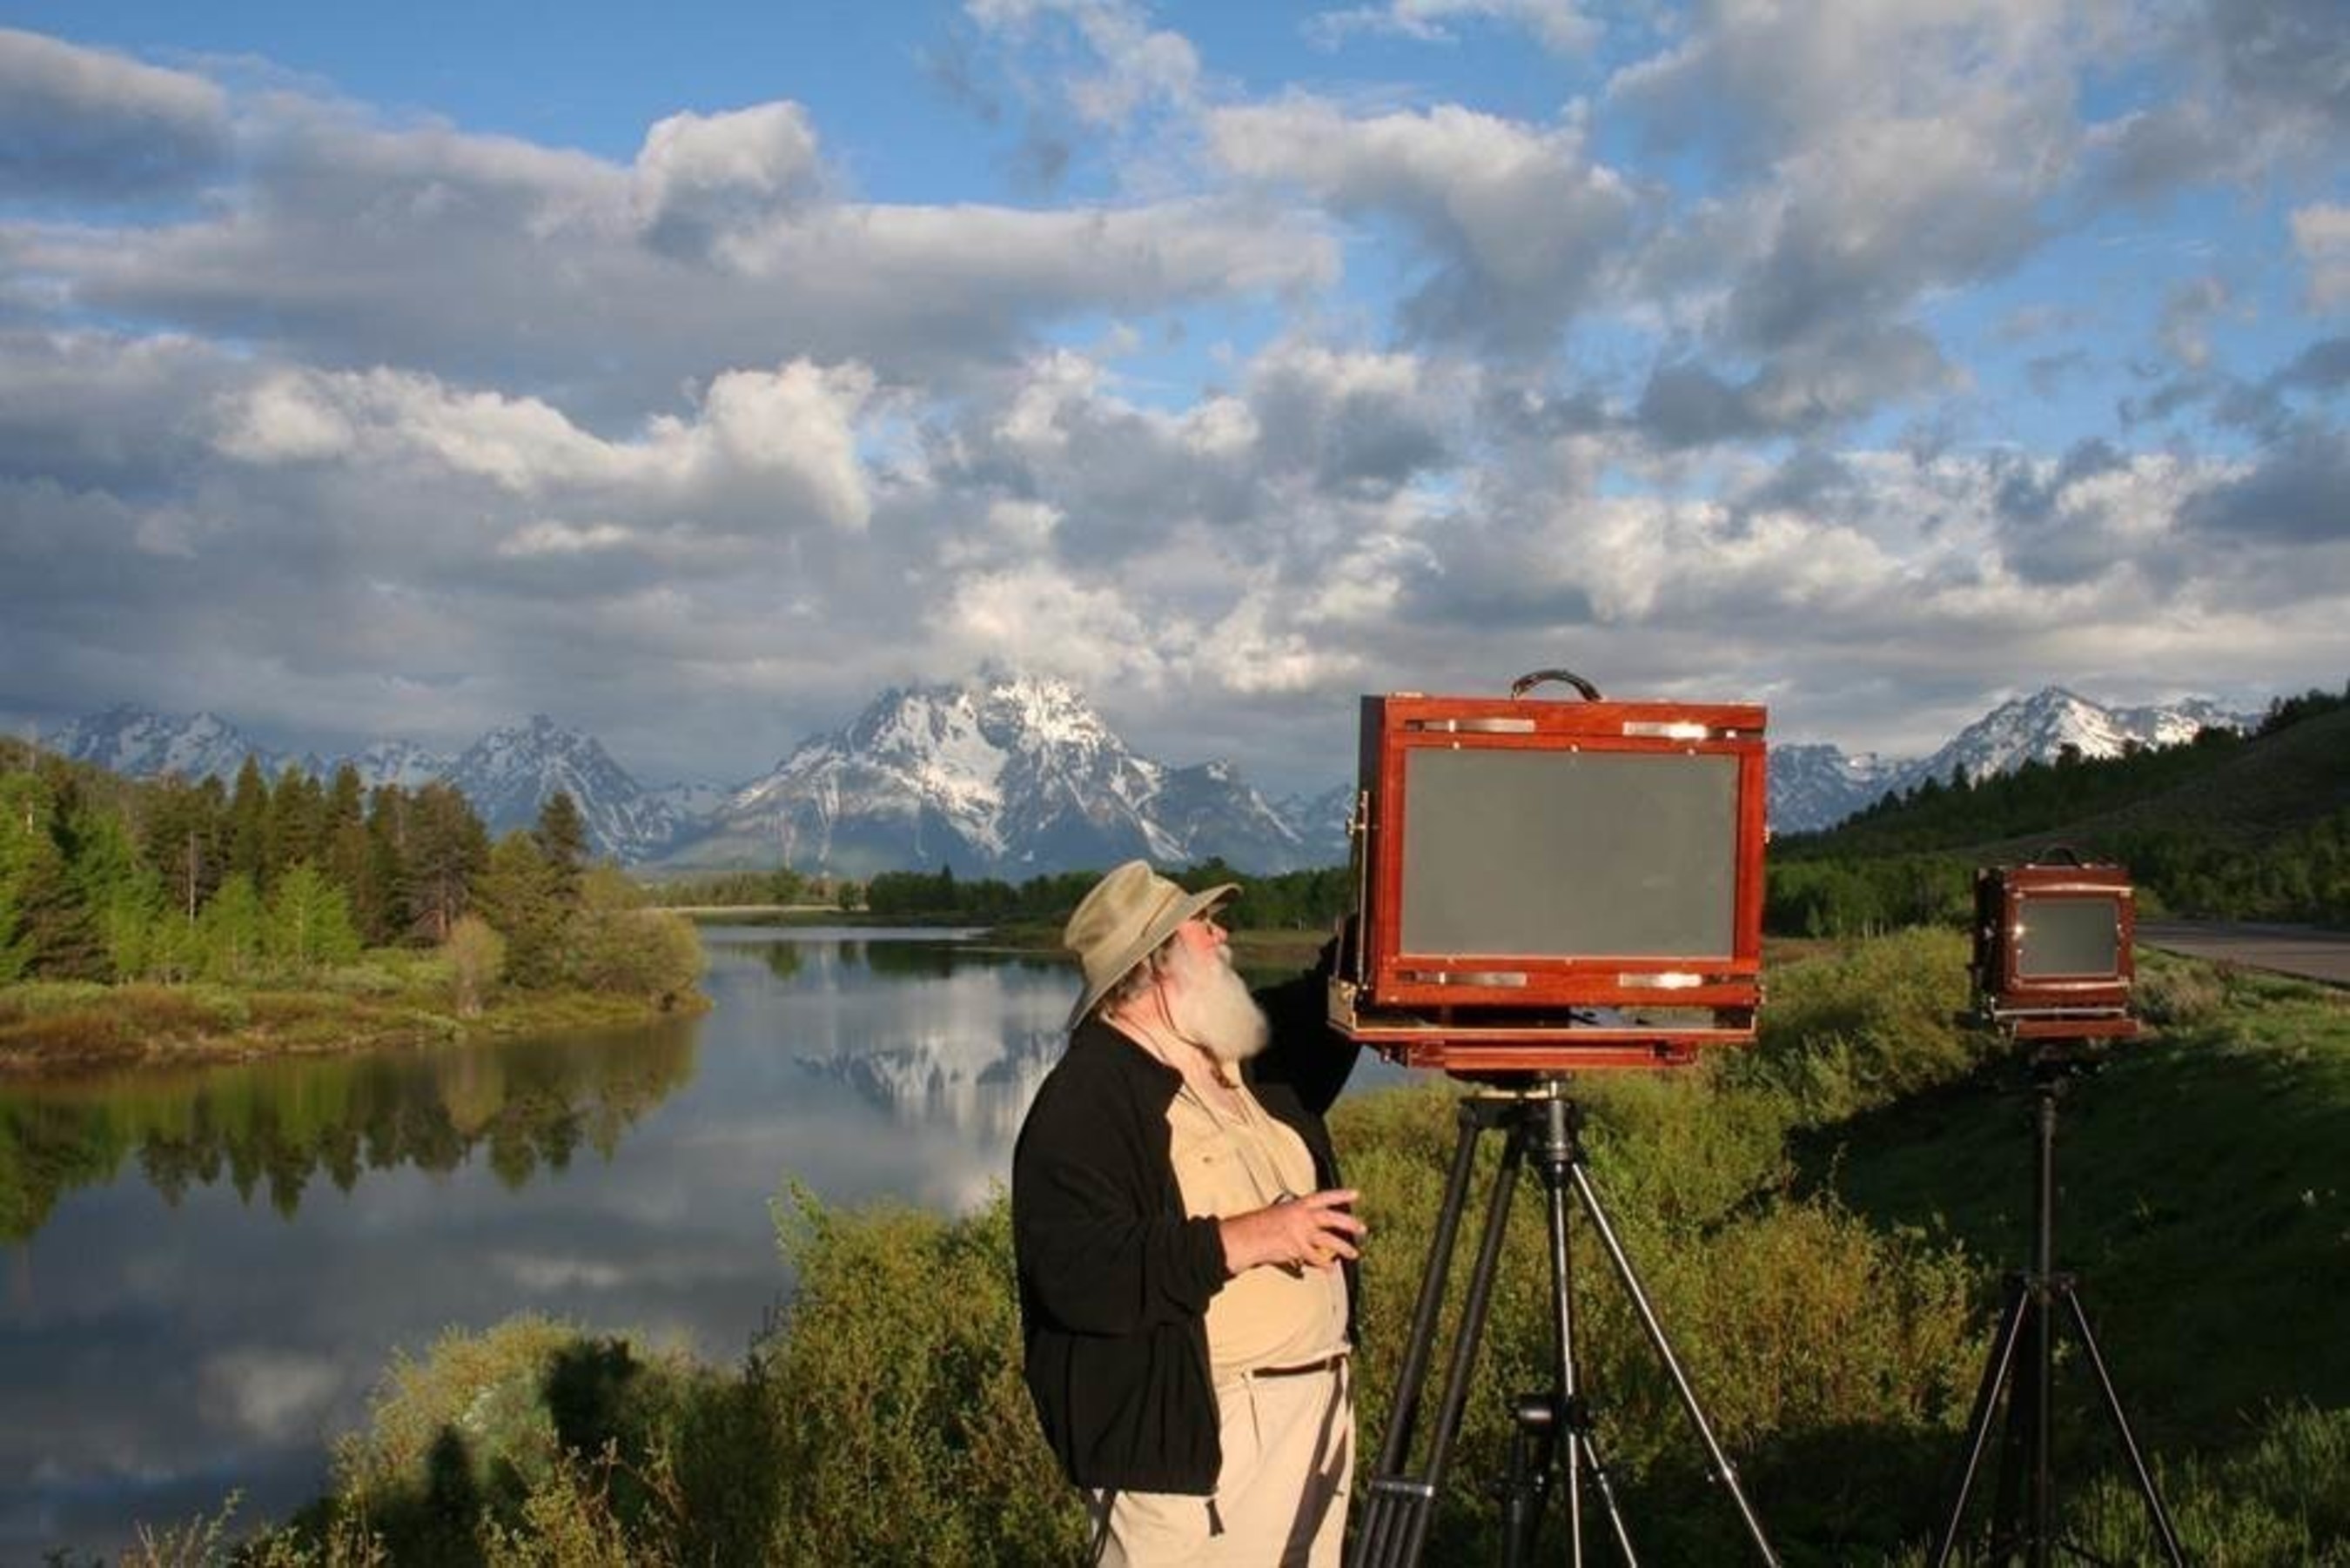 Legendary landscape photographer Clyde Butcher sets up his cameras -- his 5"x7" Deardorff is dwarfed by his massive 12"x20" (40lb) Wisner to capture a photo series at iconic Oxbow Bend, located in Grand Tetons National Park. Butcher has spent 50 years photographing 33 U.S. National Parks to create a timeless collection highlighted in his new book "Celebrating America's National Parks."